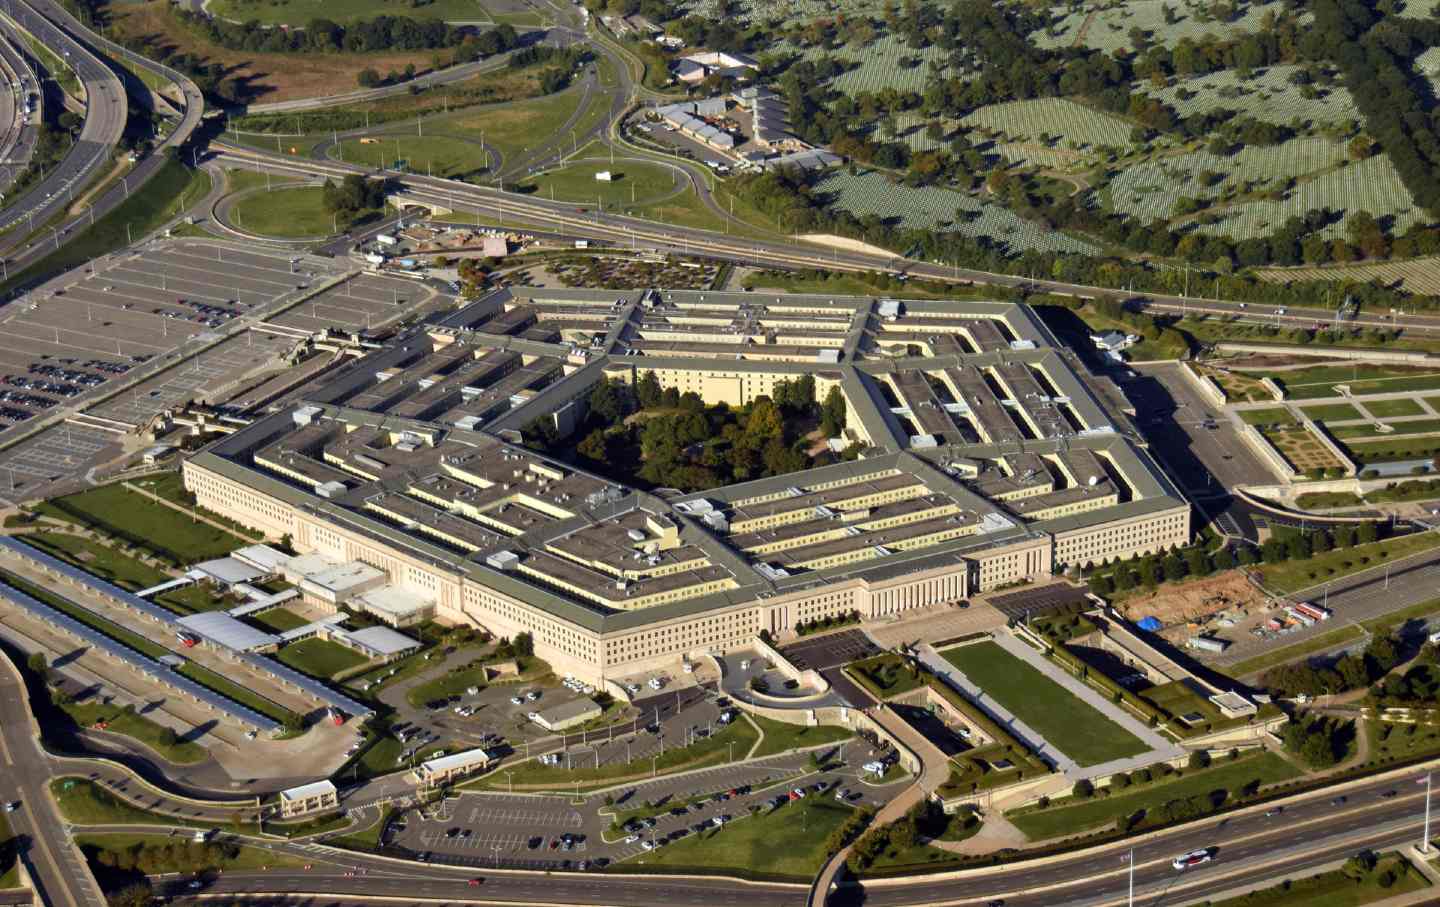 Aerial view image of the Pentagon.